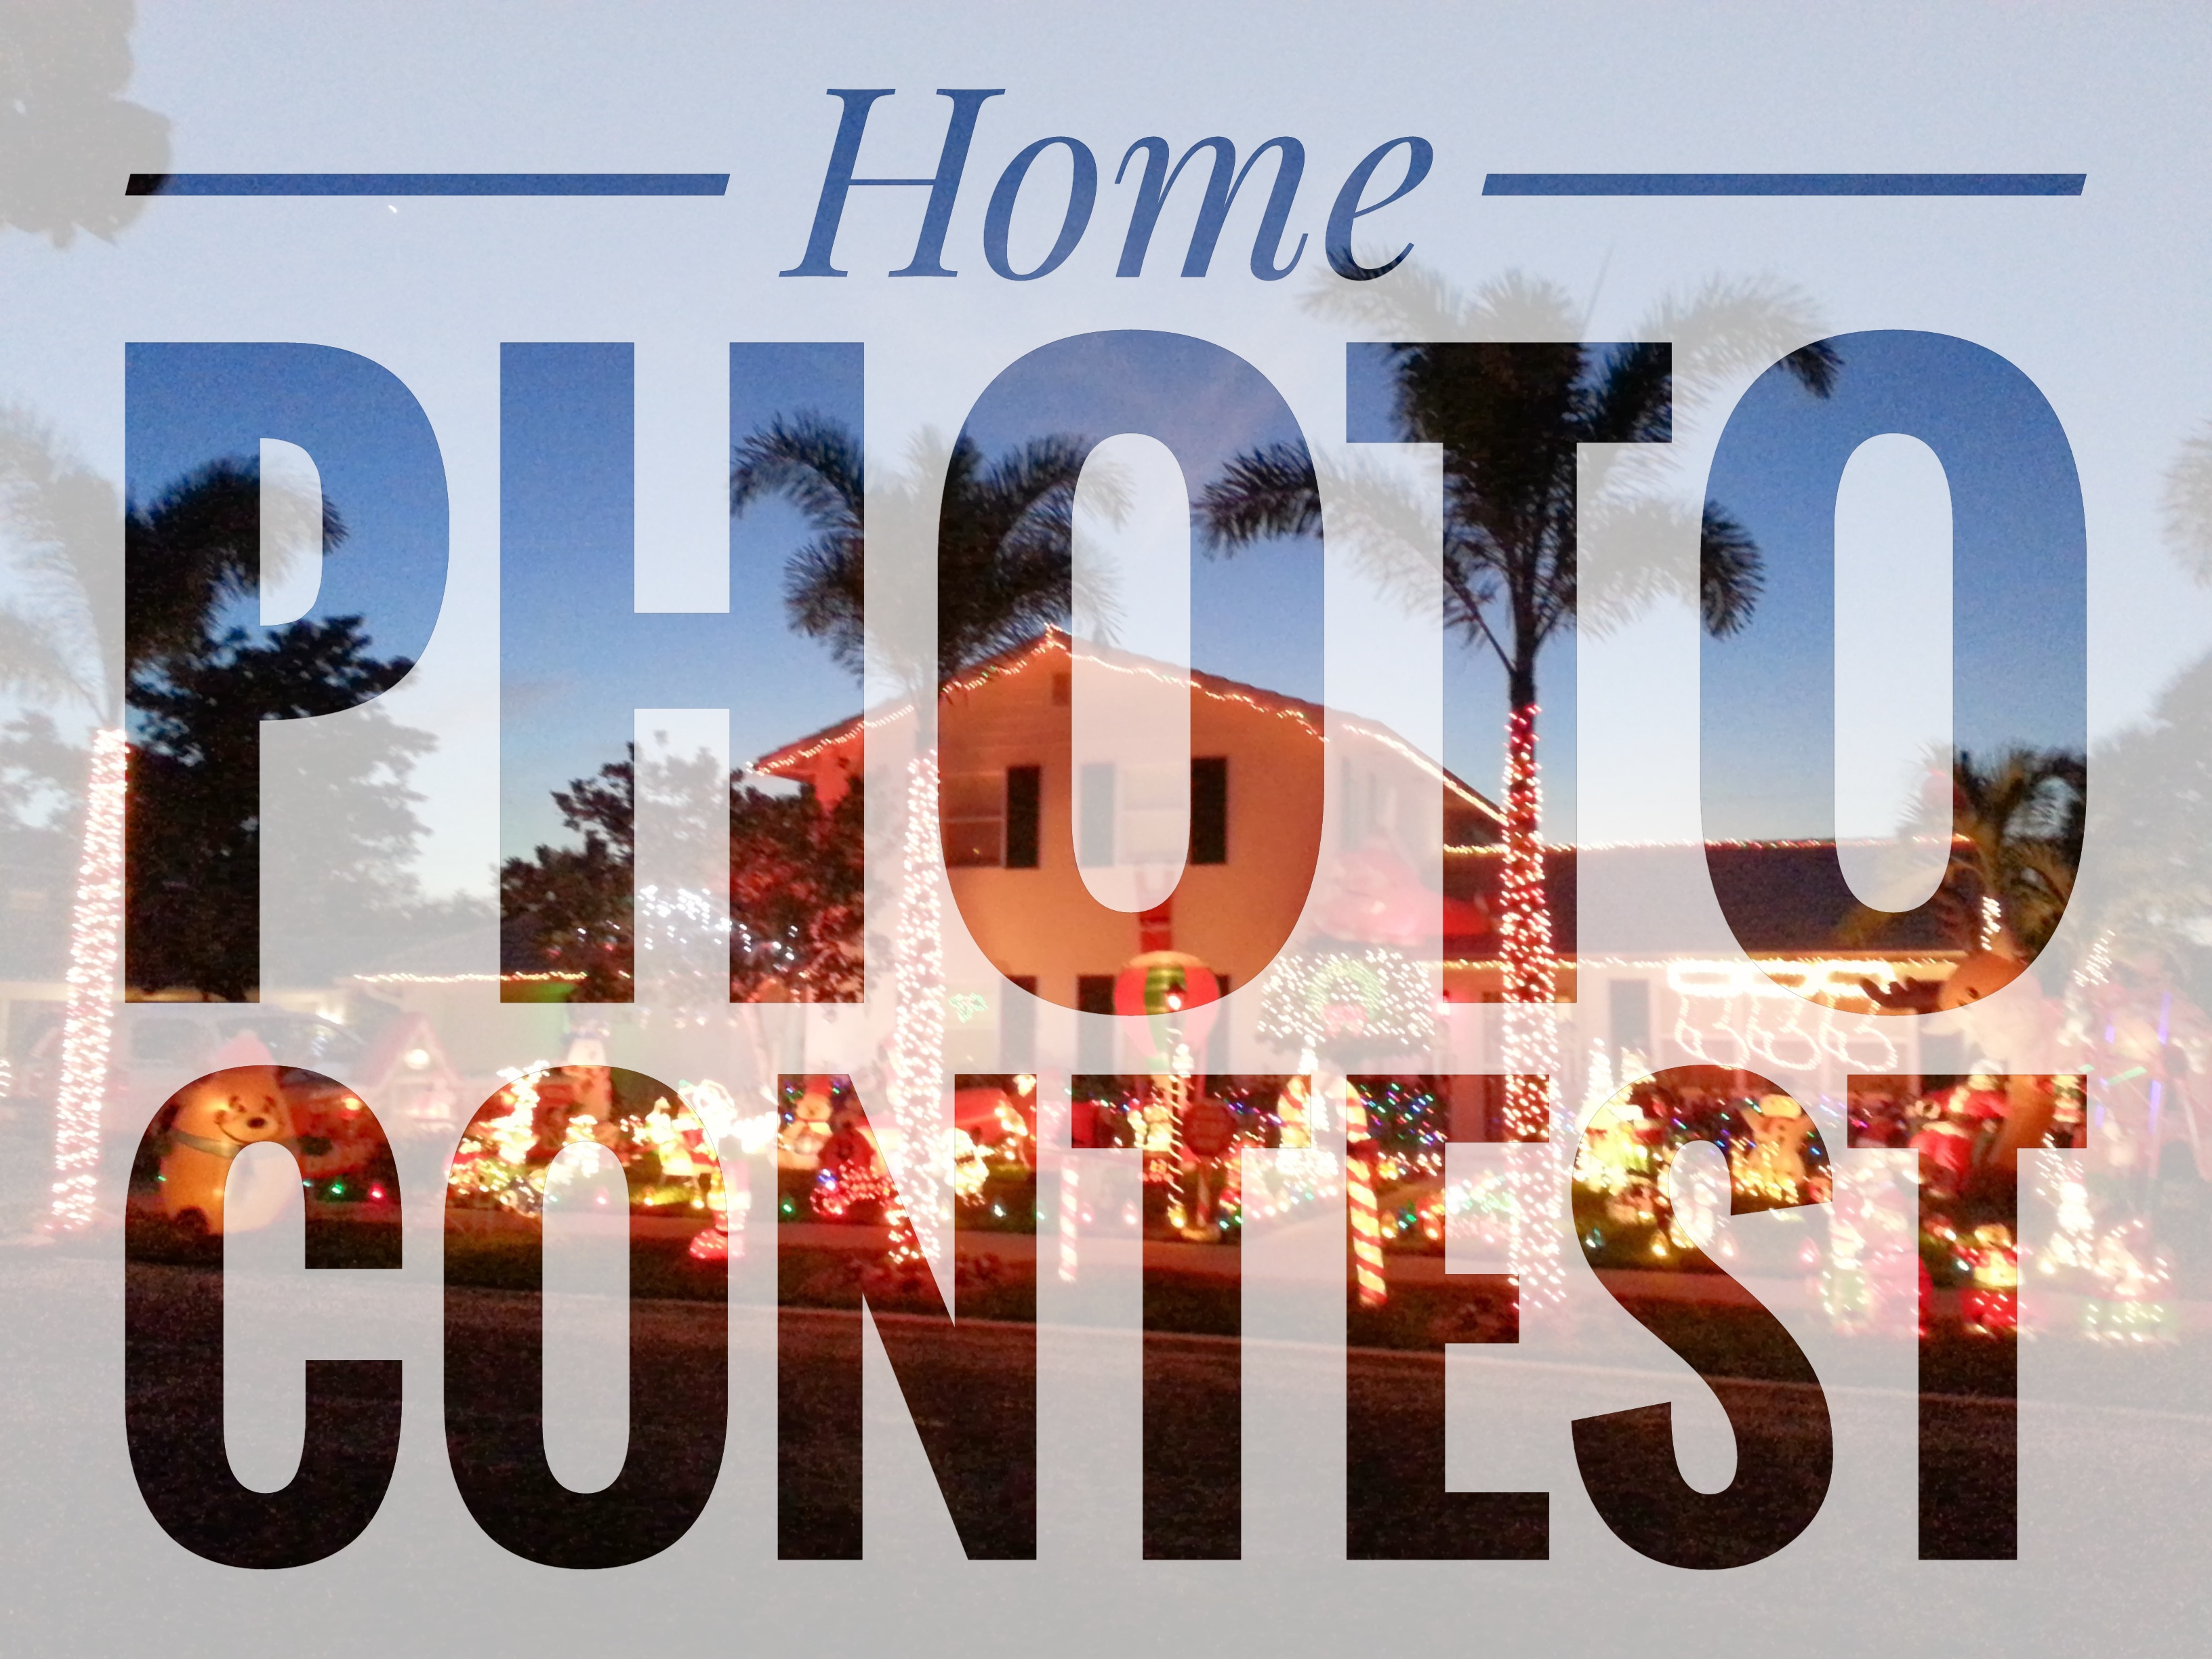 Best Home in West Palm Beach Photo Contest!